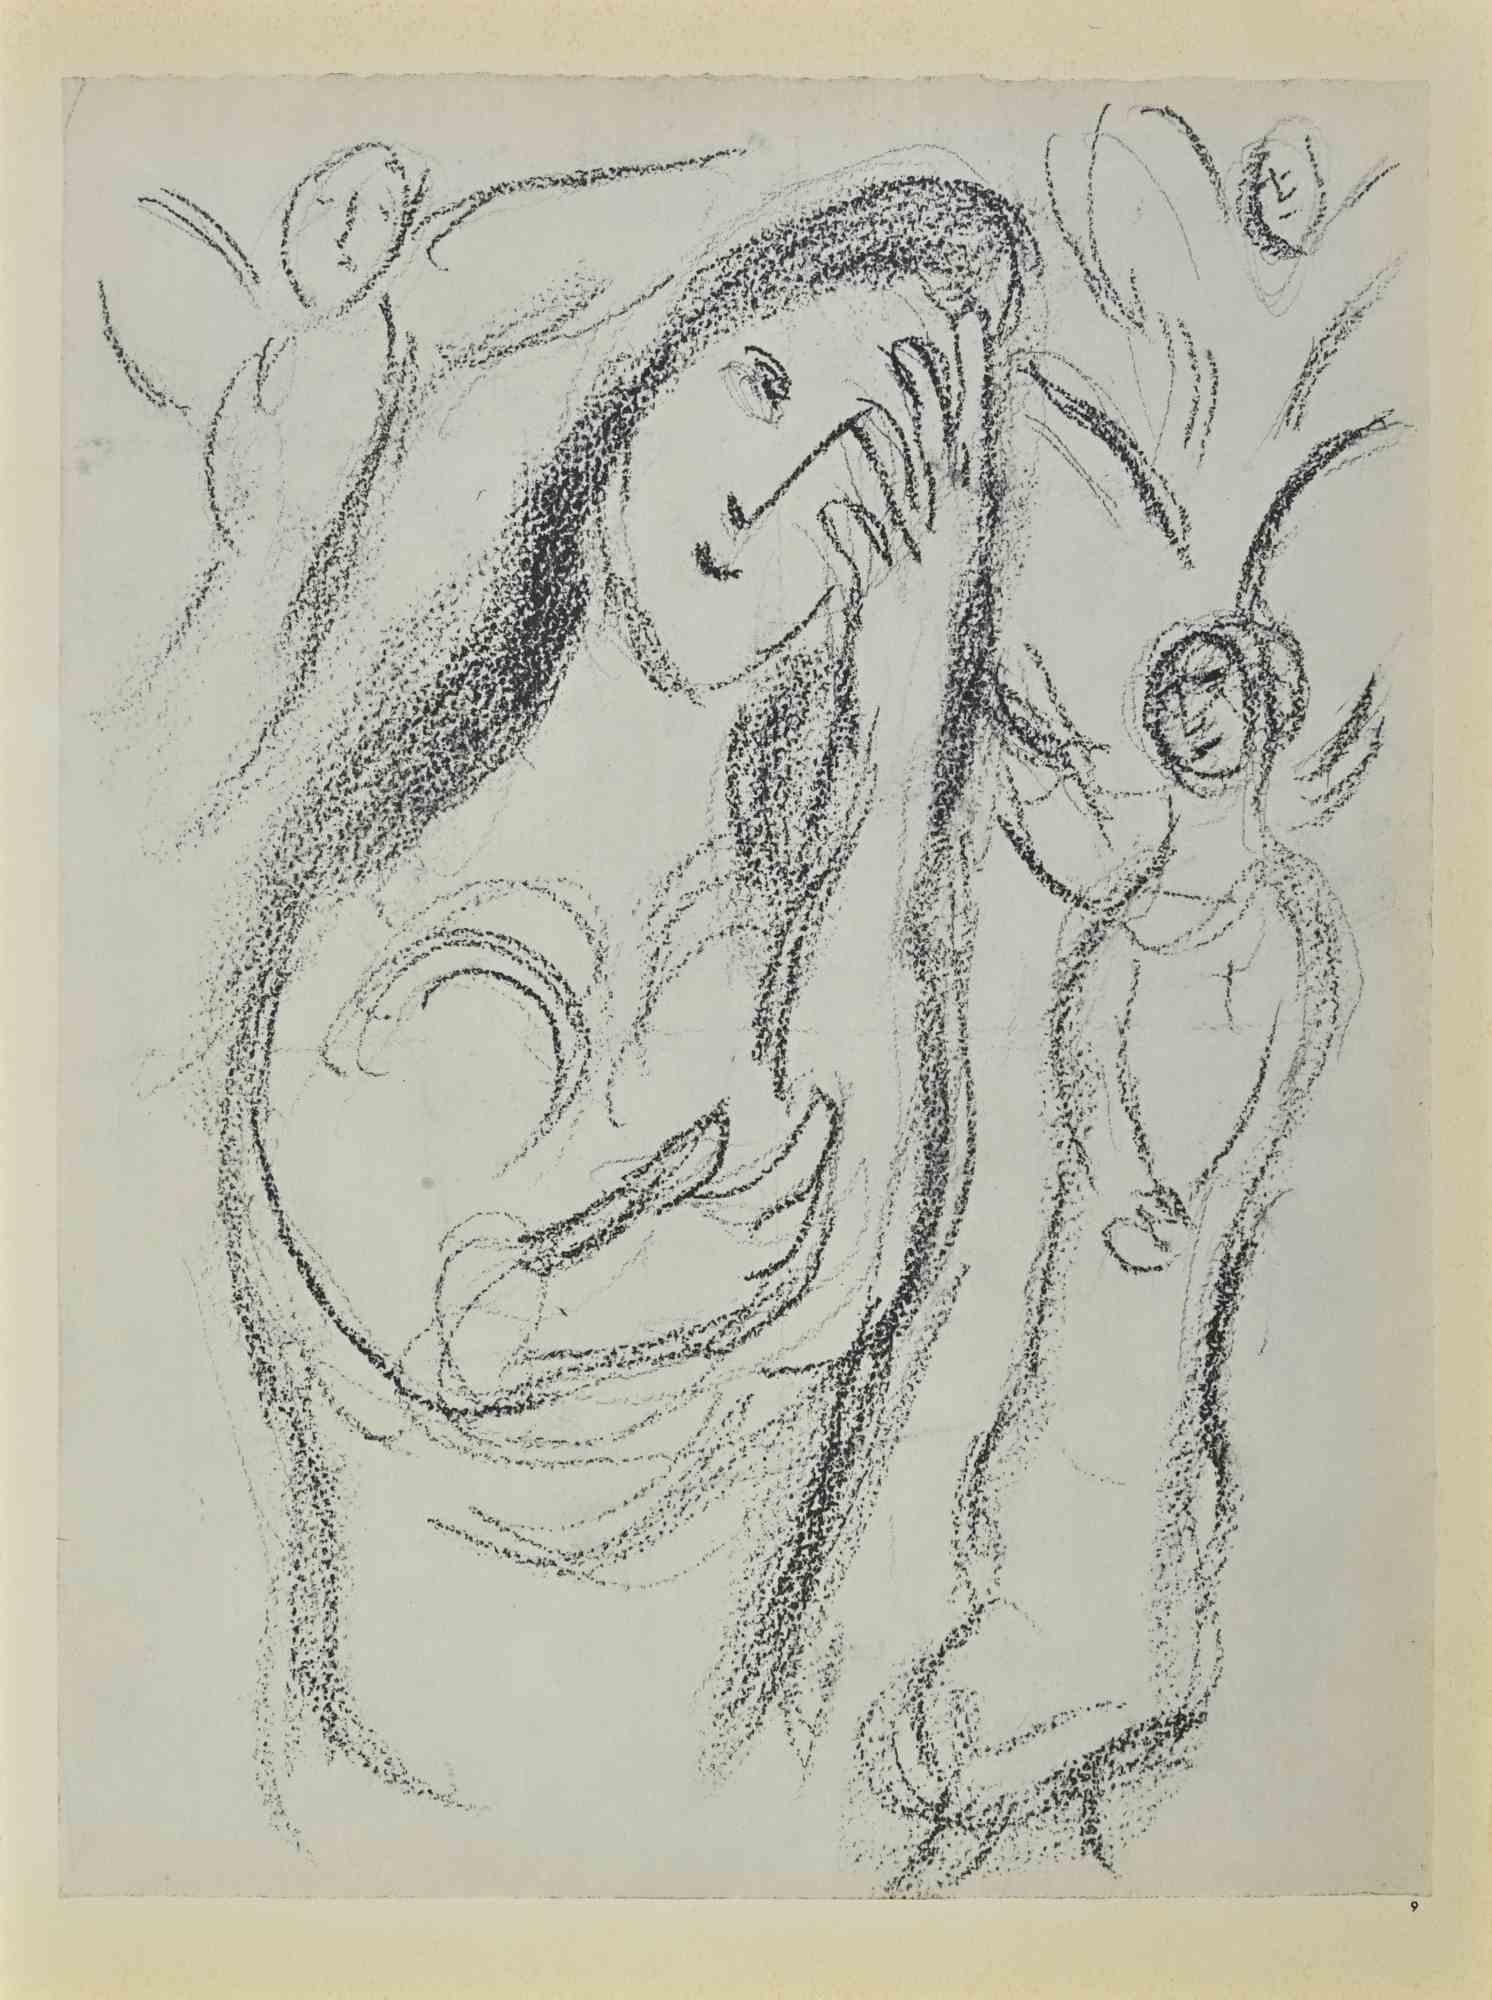 Sarah And The Angels  is an artwork realized by March Chagall, 1960s.

Lithograph on brown-toned paper, no signature.

Lithograph on both sheets.

Edition of 6500 unsigned lithographs. Printed by Mourlot and published by Tériade, Paris.

Ref.